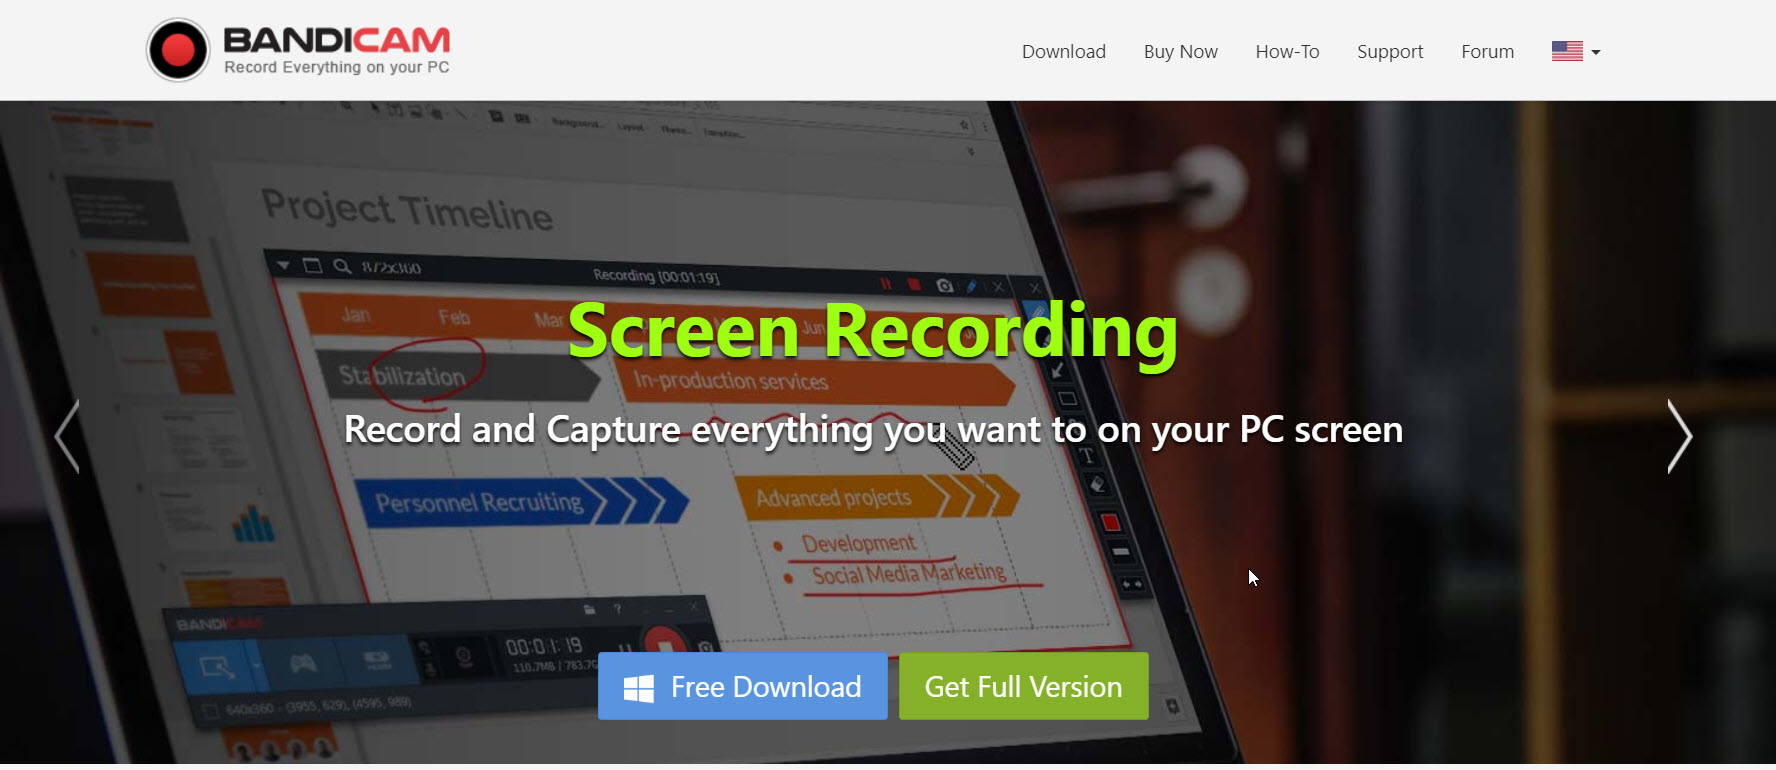 Bandicam Screen Recorder Review: Pros, Cons and Where to download (2019 Update)